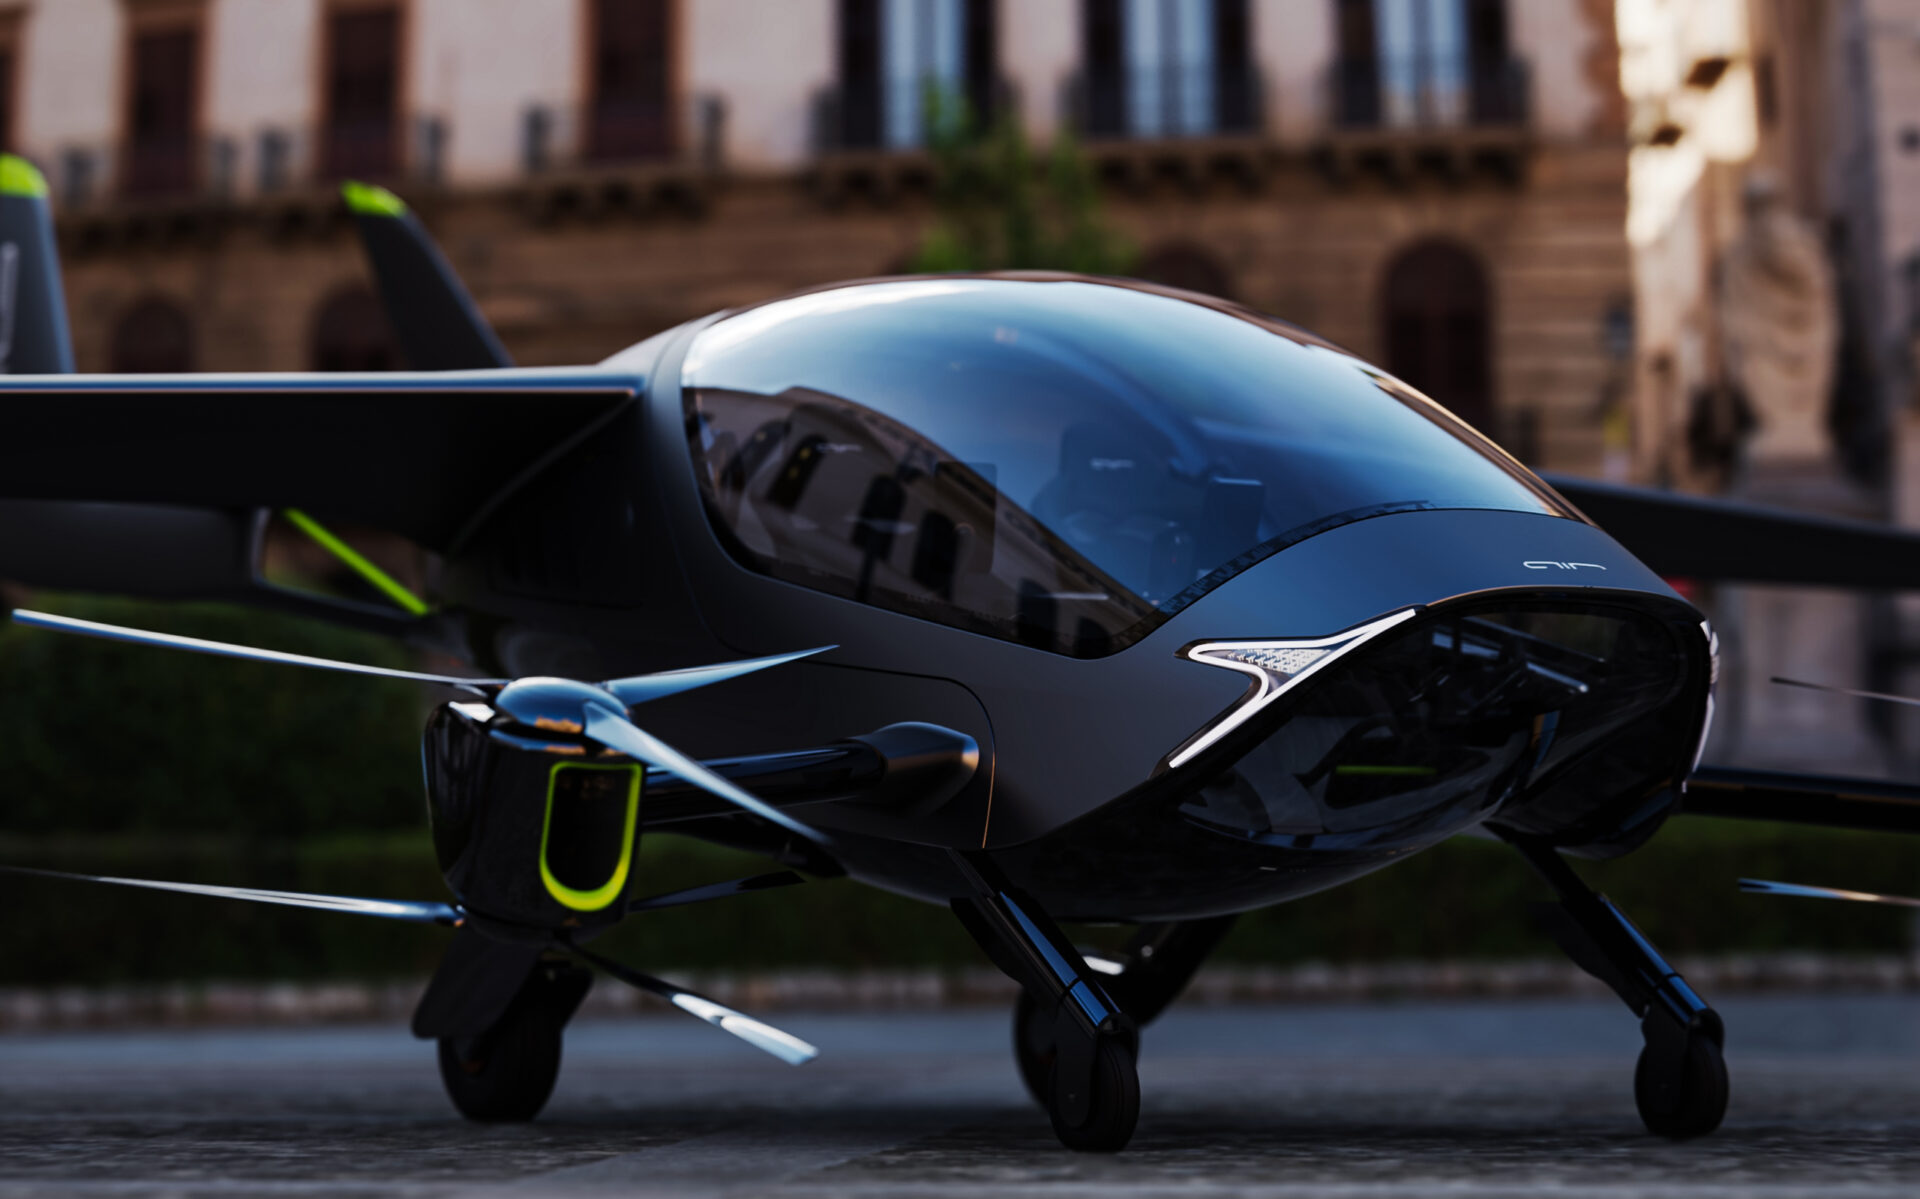 AIR ONE personal electric plane. Photo courtesy of AIR